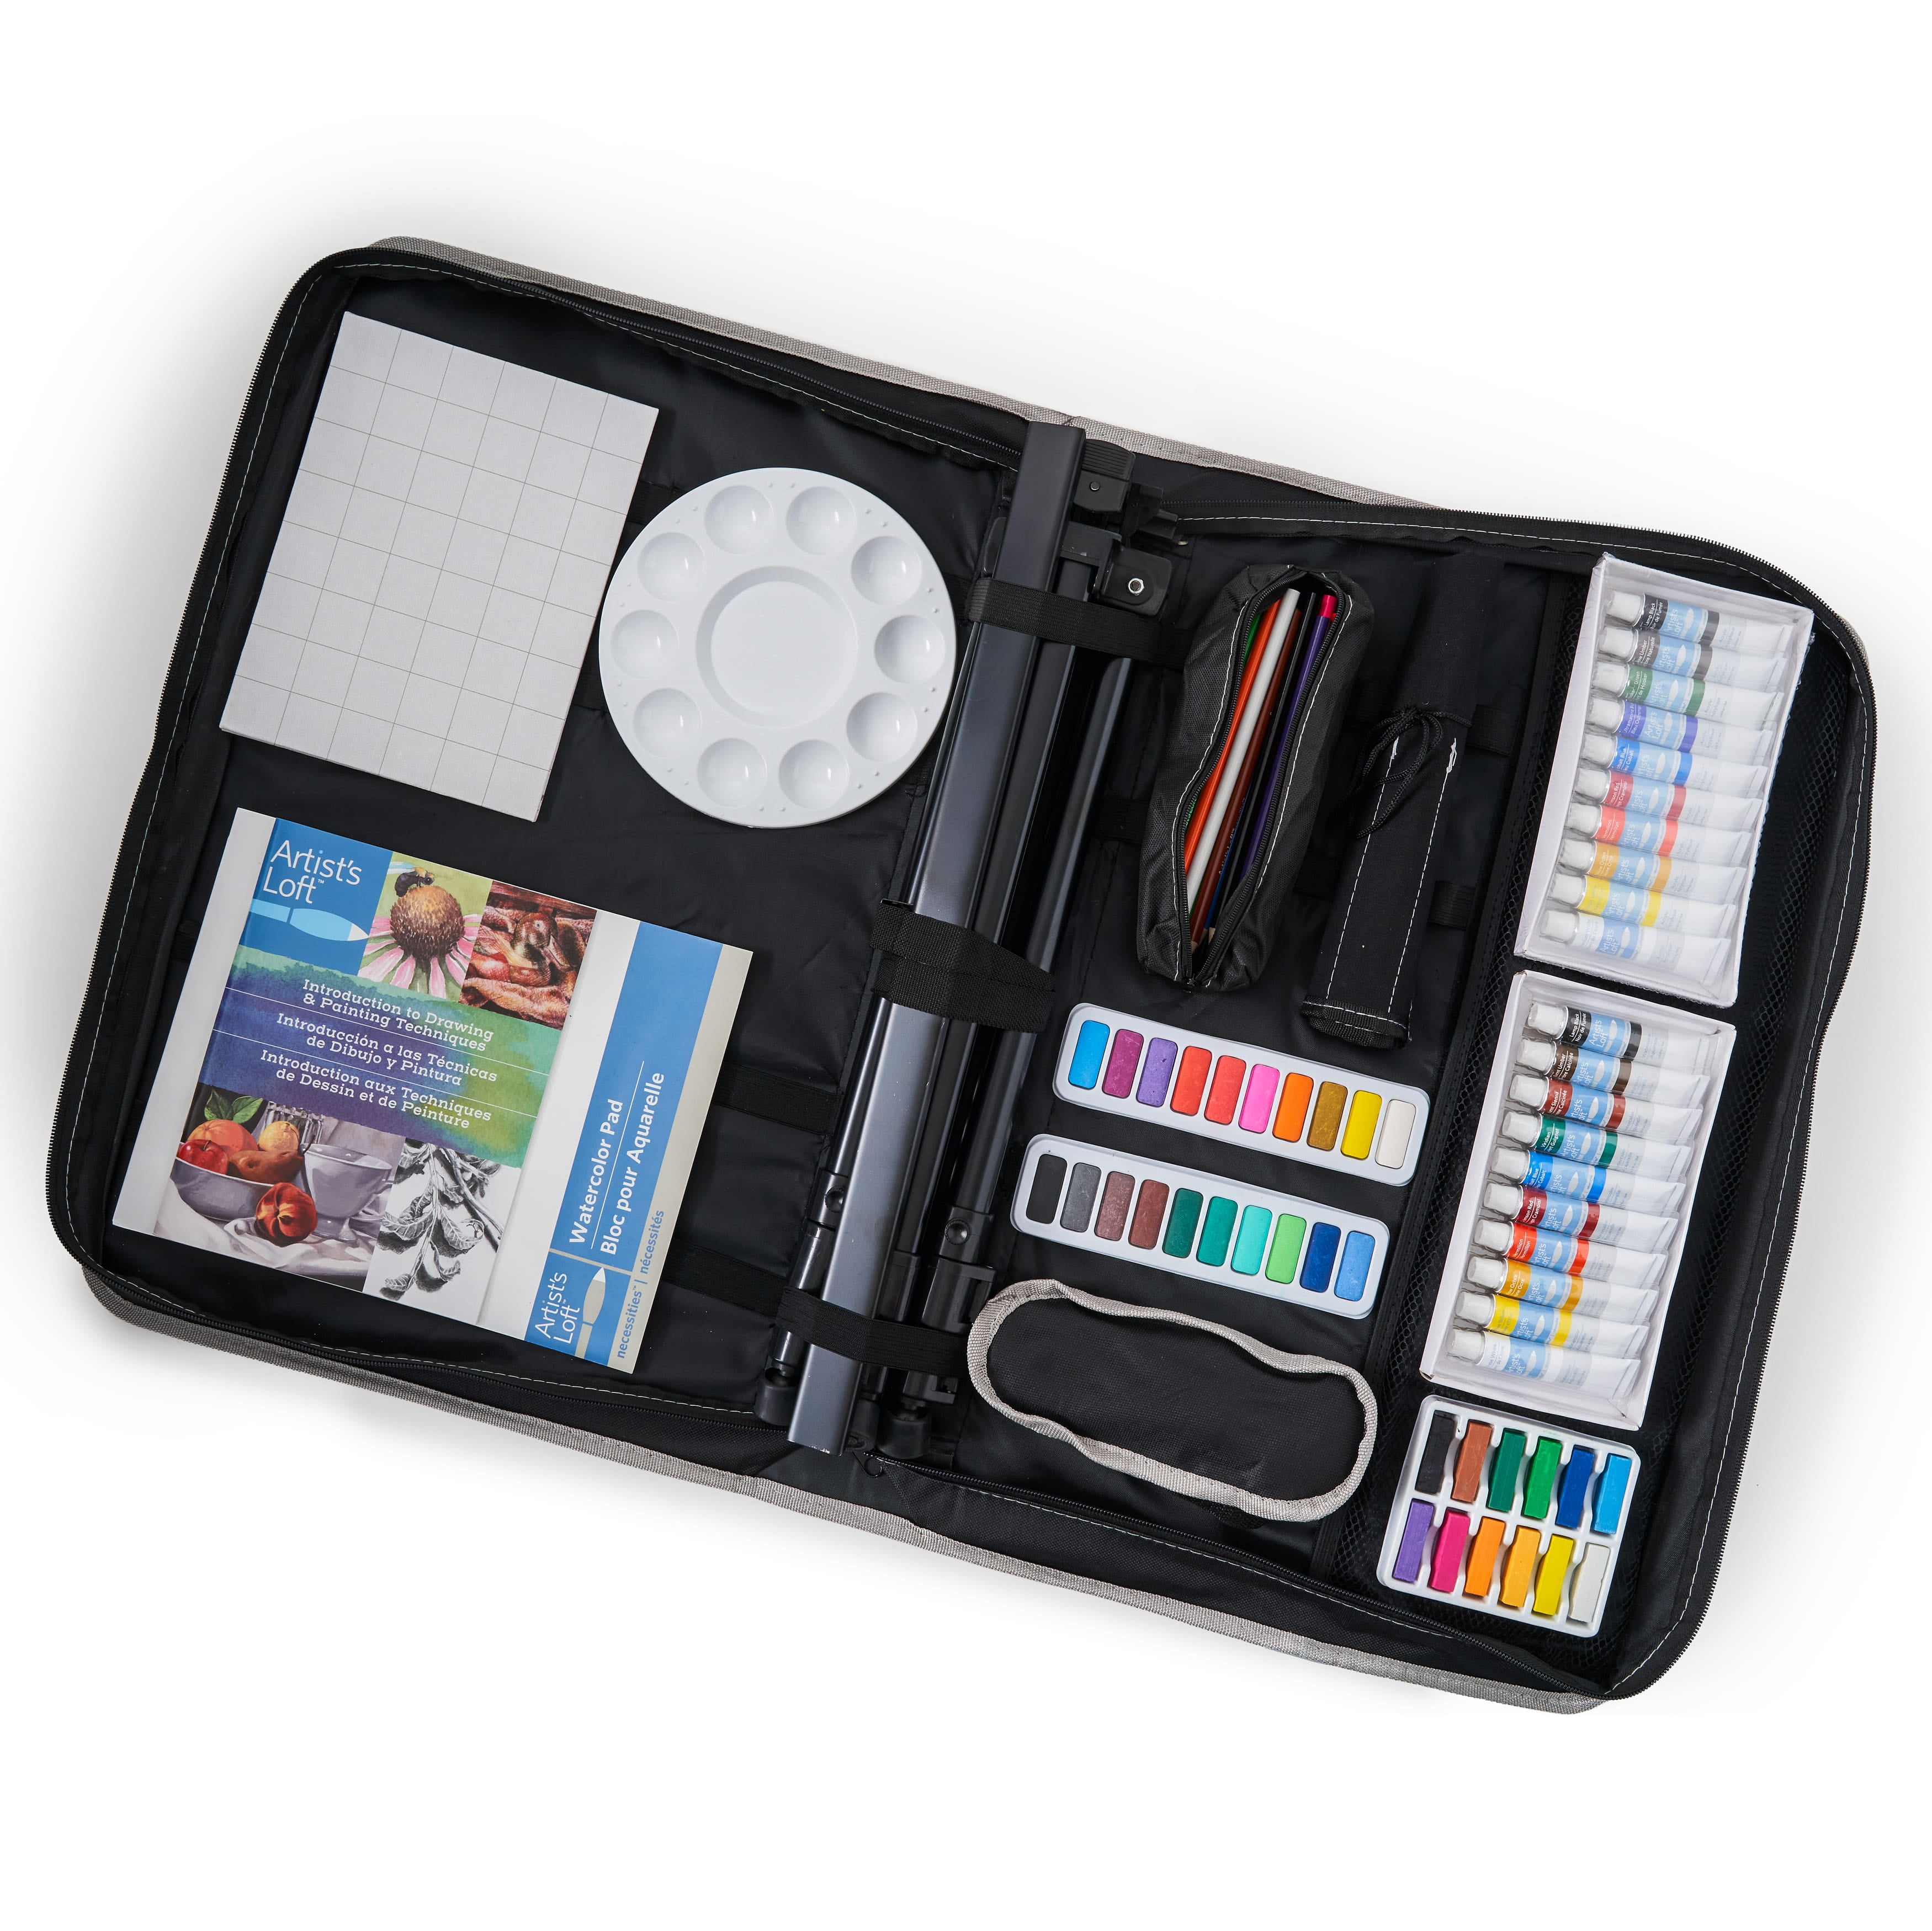 50-Piece Drawing Set with Easel by Artist's Loft™